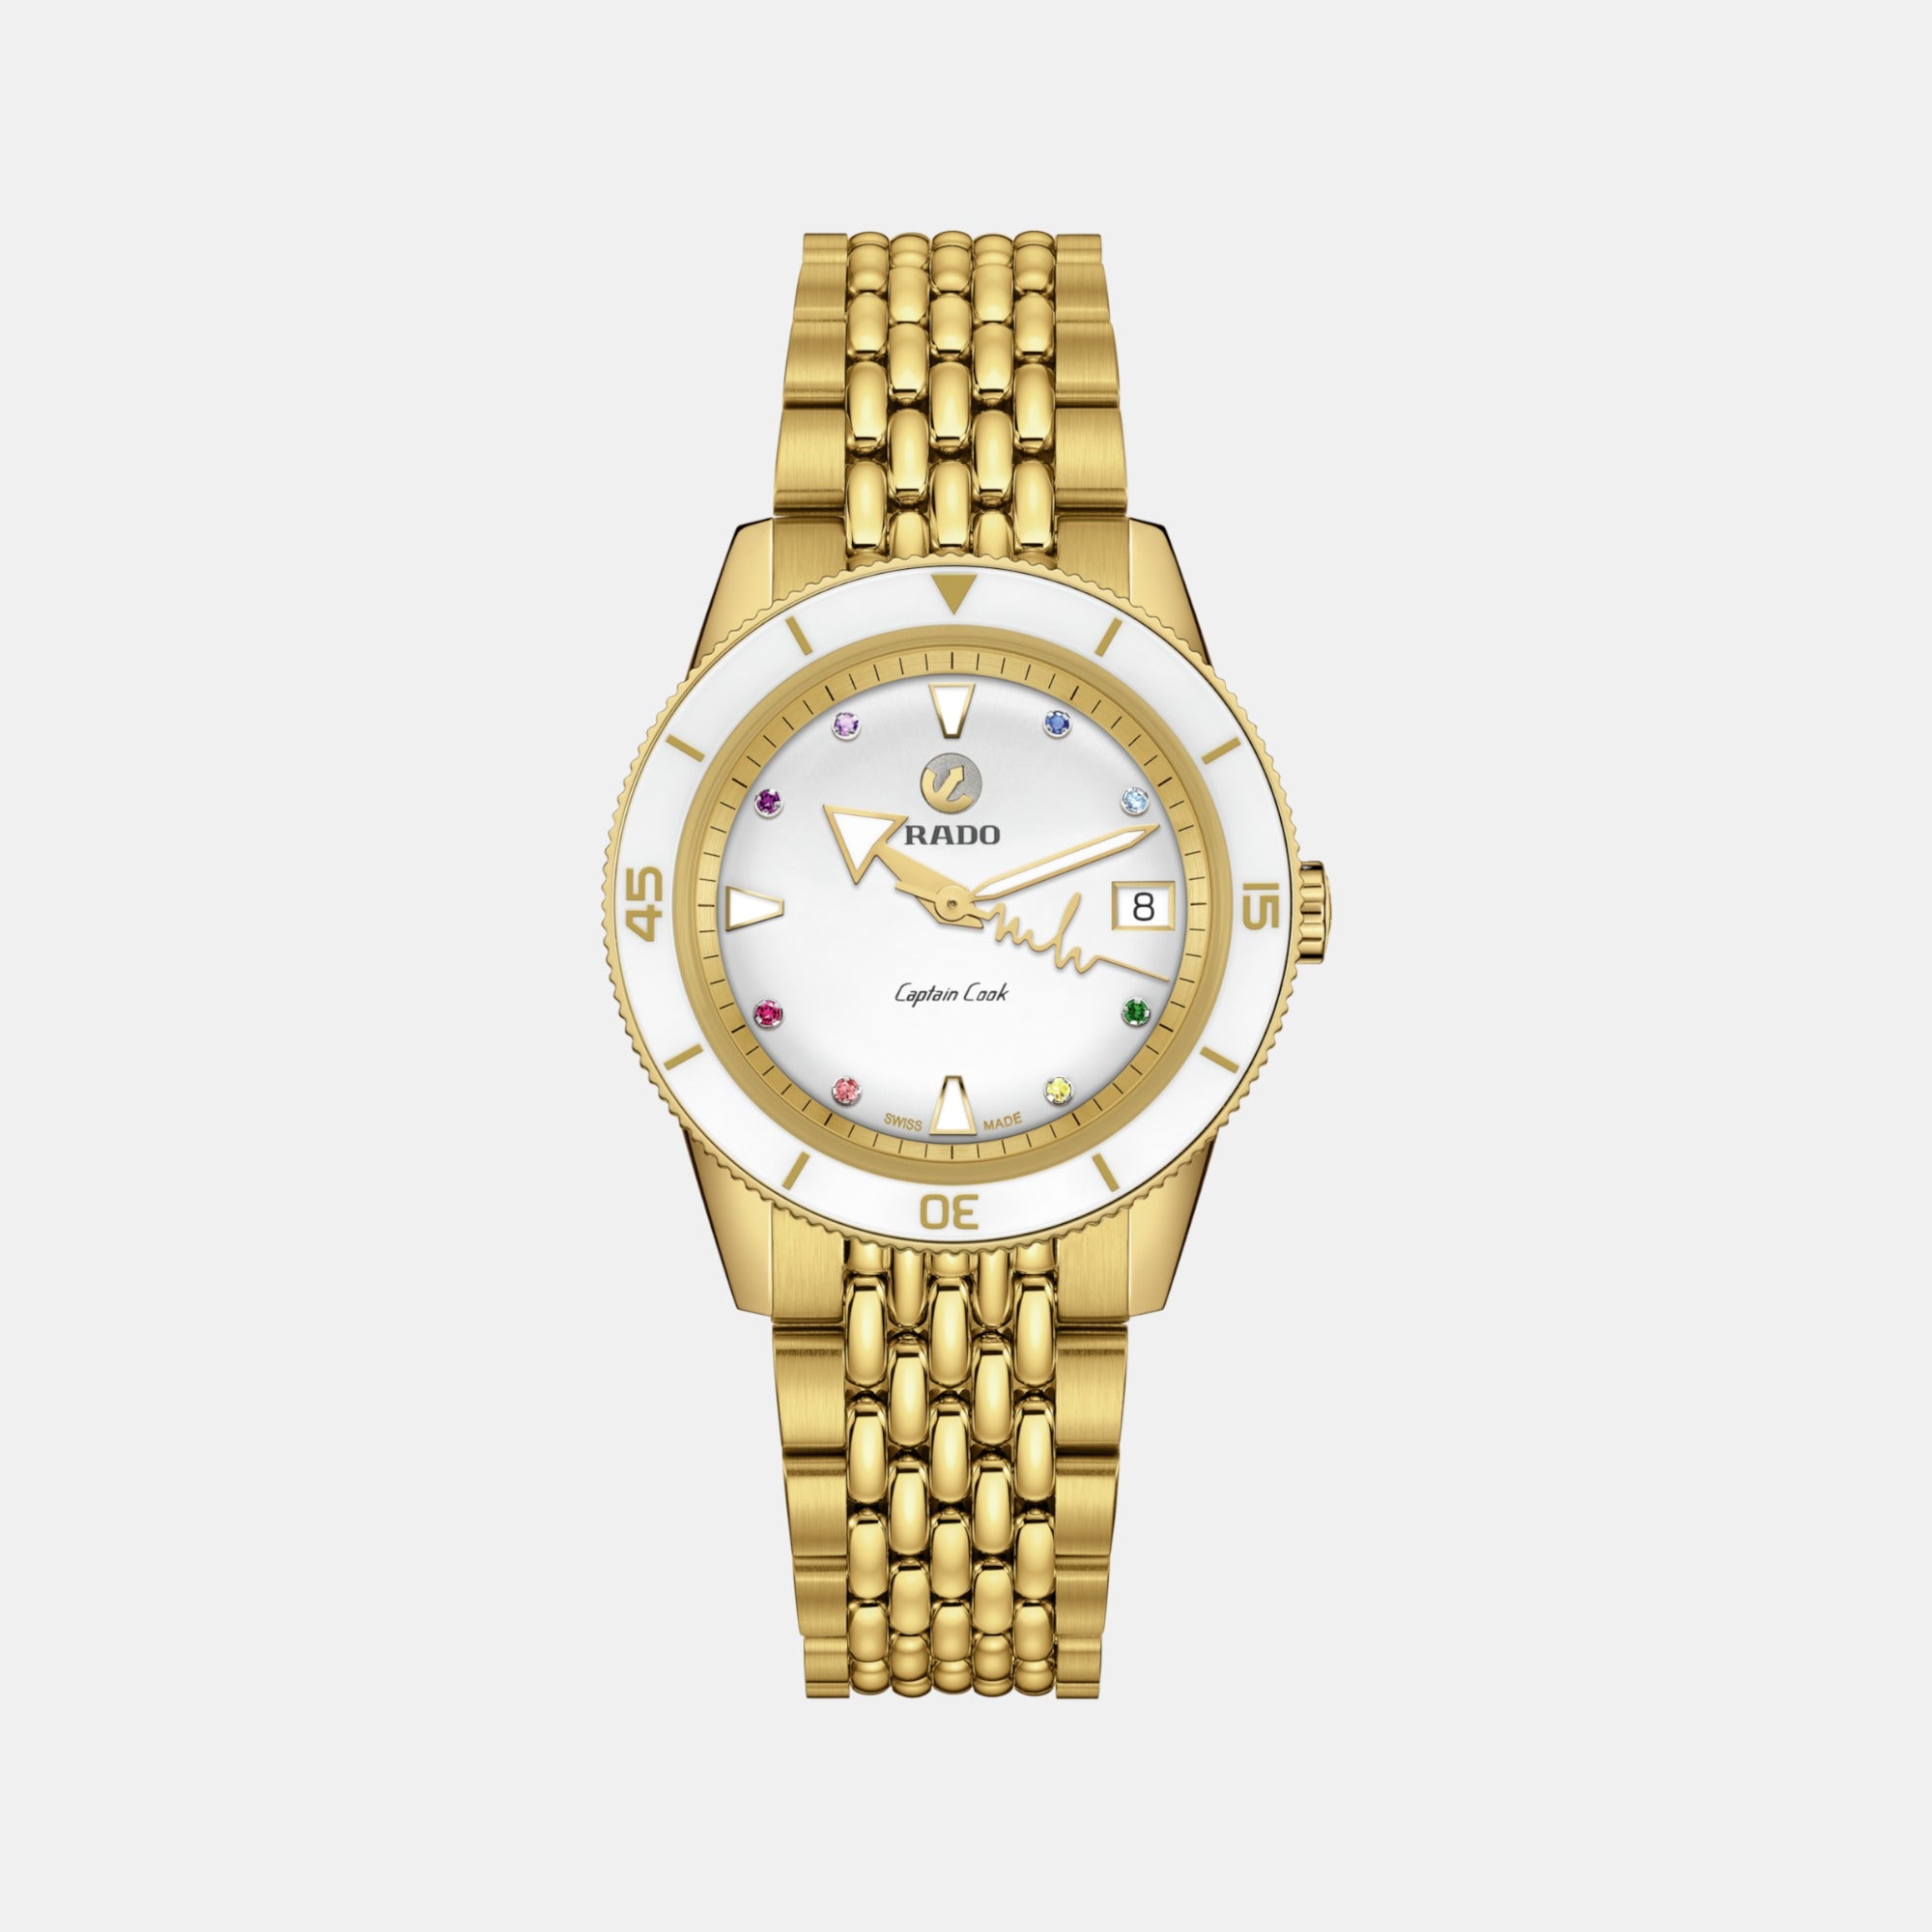 Rado Female Analog Stainless Steel Automatic Watch | Rado – Just In Time